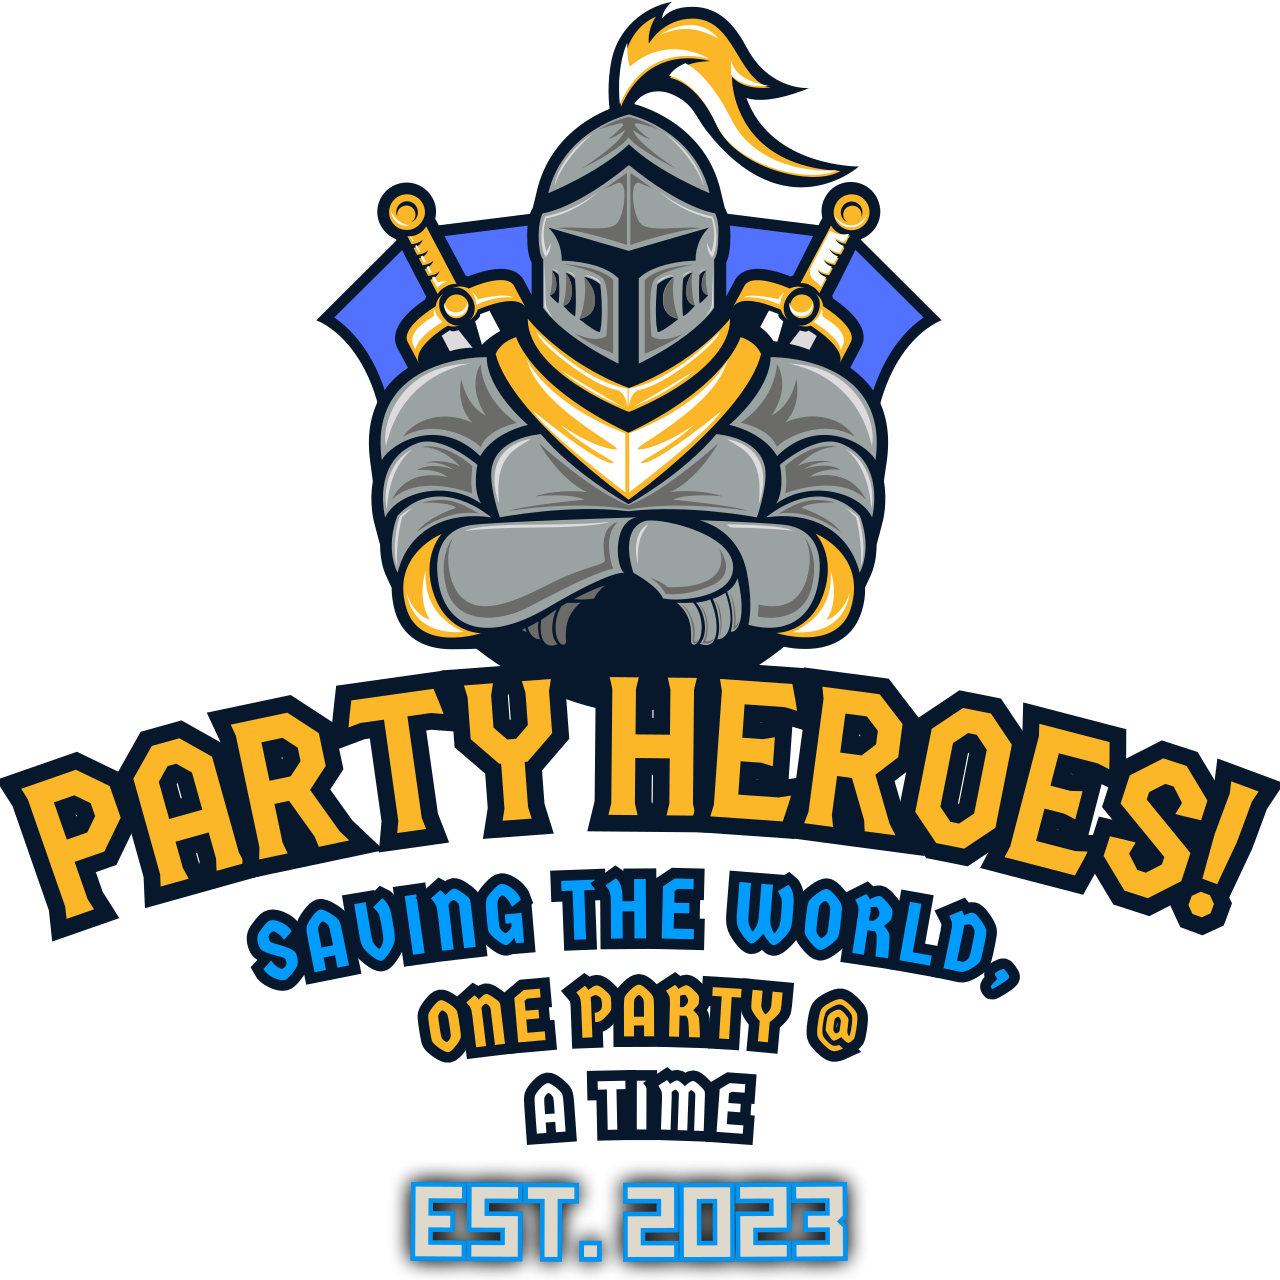 PARTY HEROES!'s web page